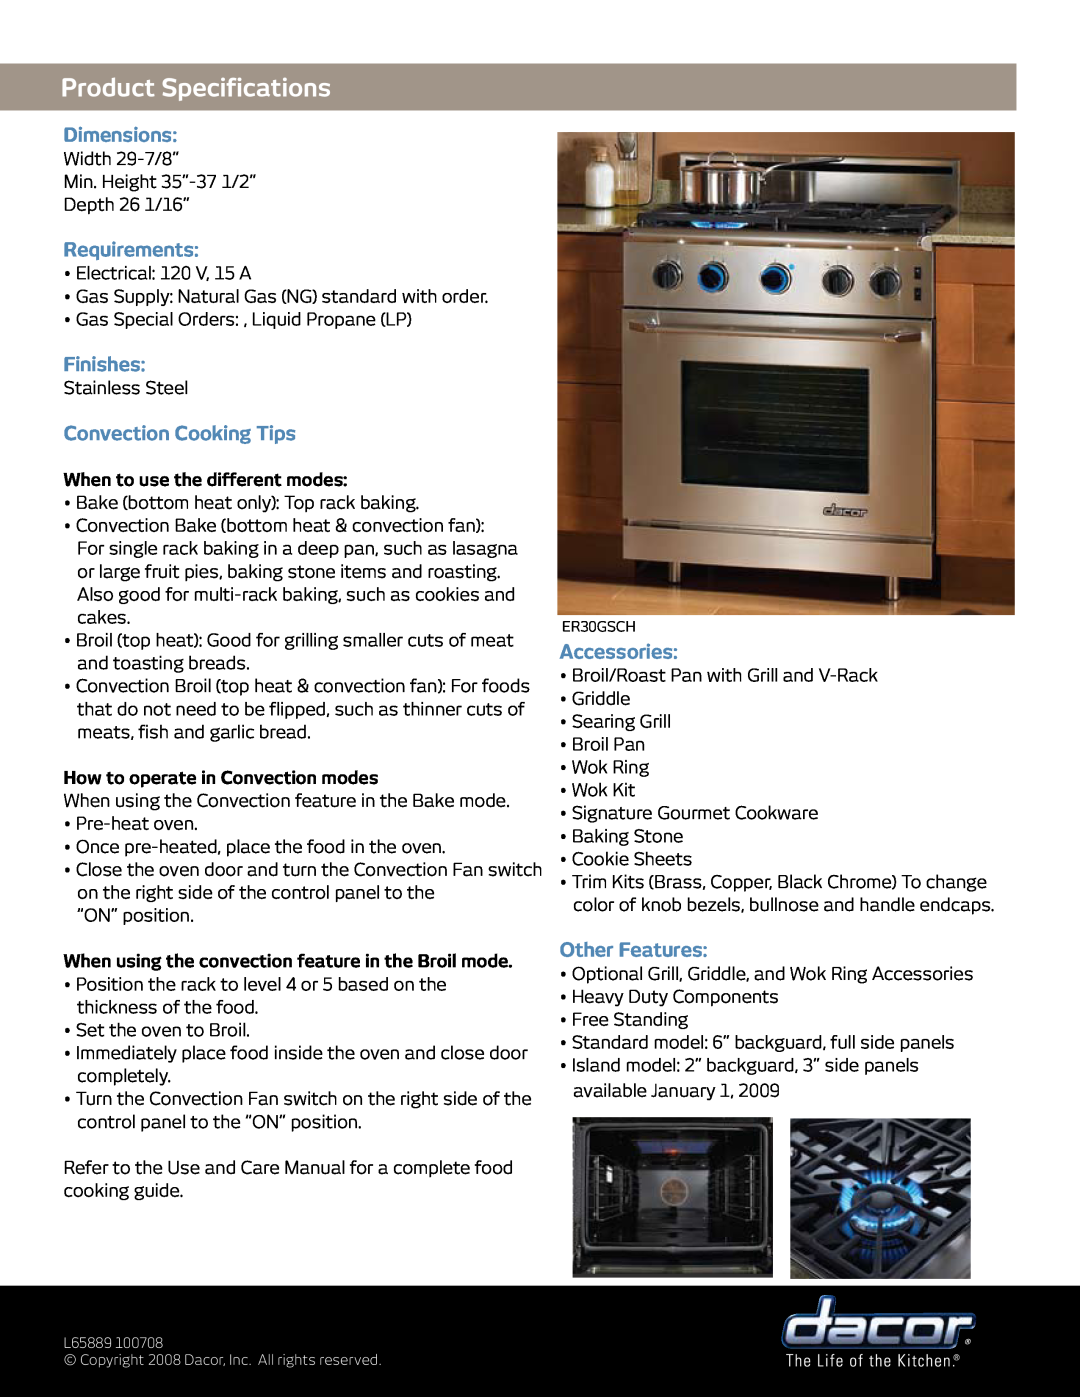 Dacor ER30GSCH manual Product Specifications, Dimensions, Requirements, Finishes, Convection Cooking Tips, Accessories 